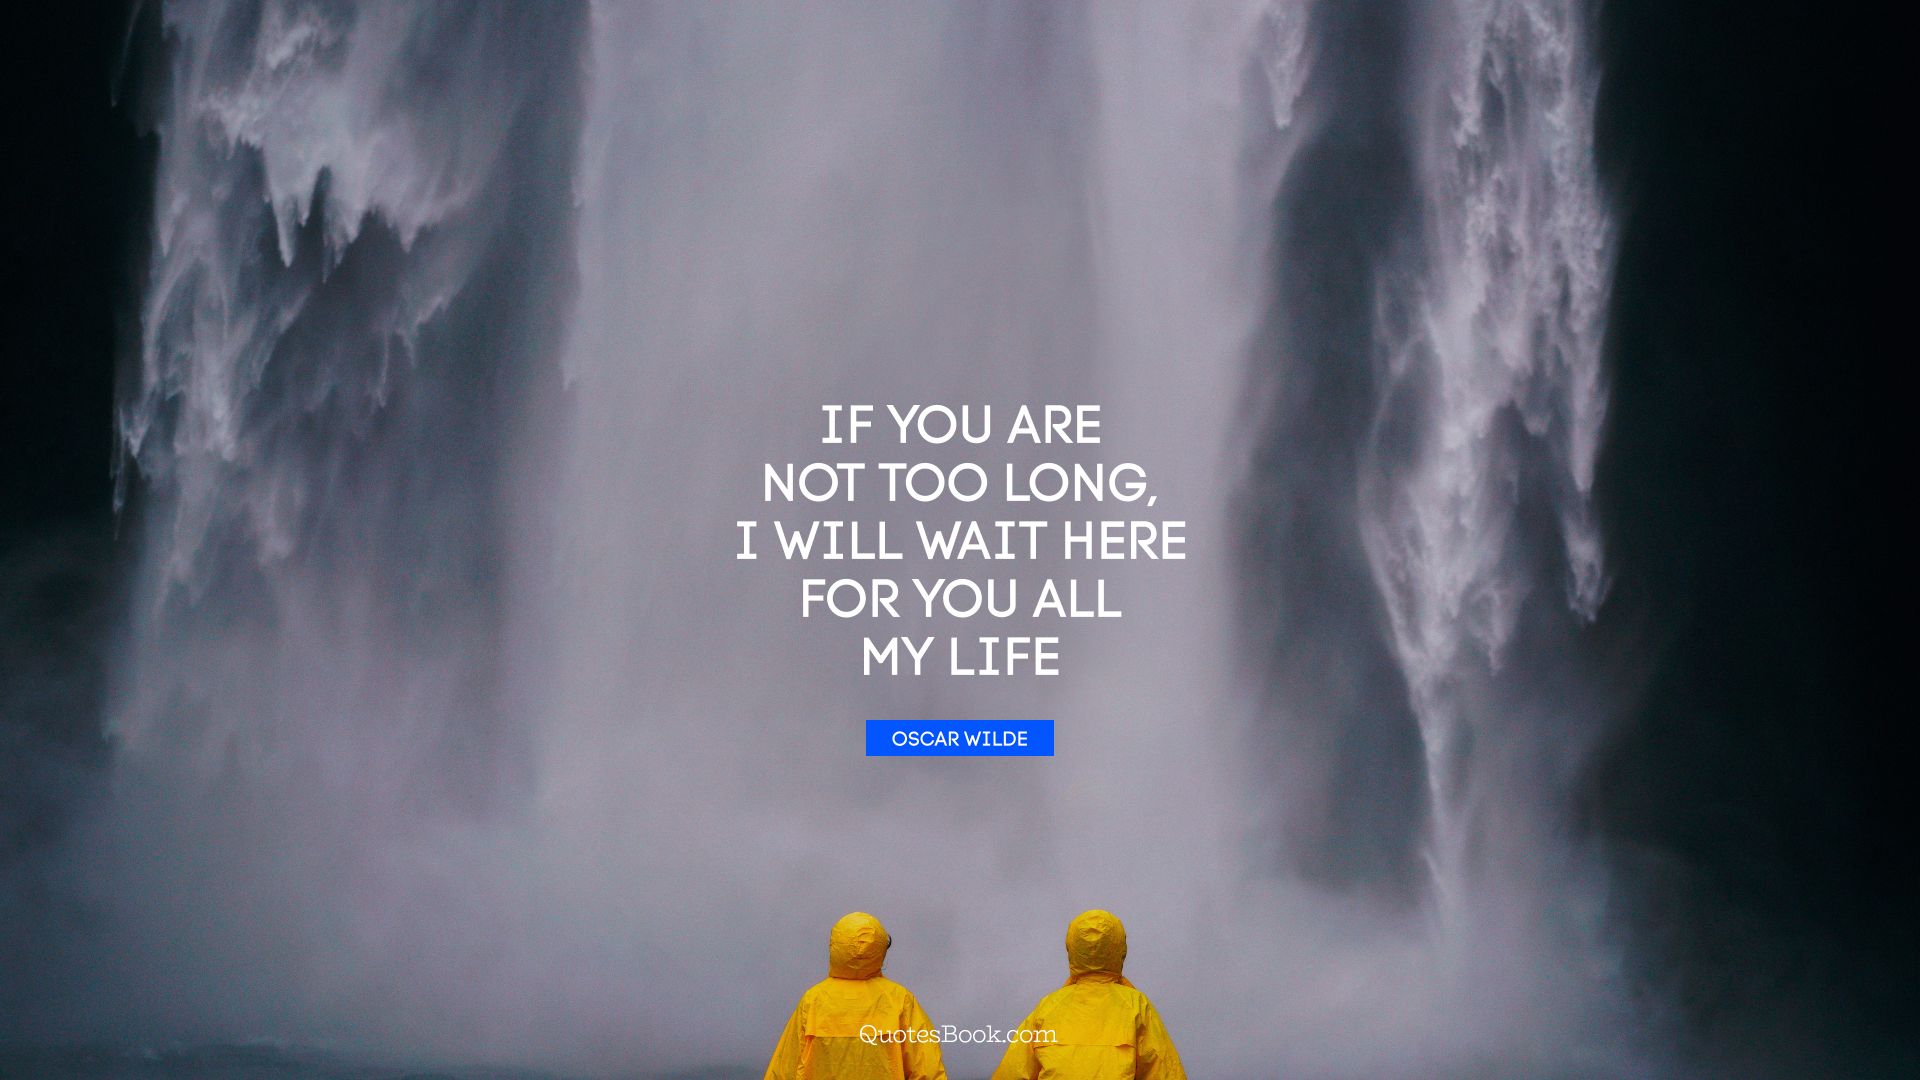 If you are not too long, I will wait here for you all my life. - Quote by Oscar Wilde